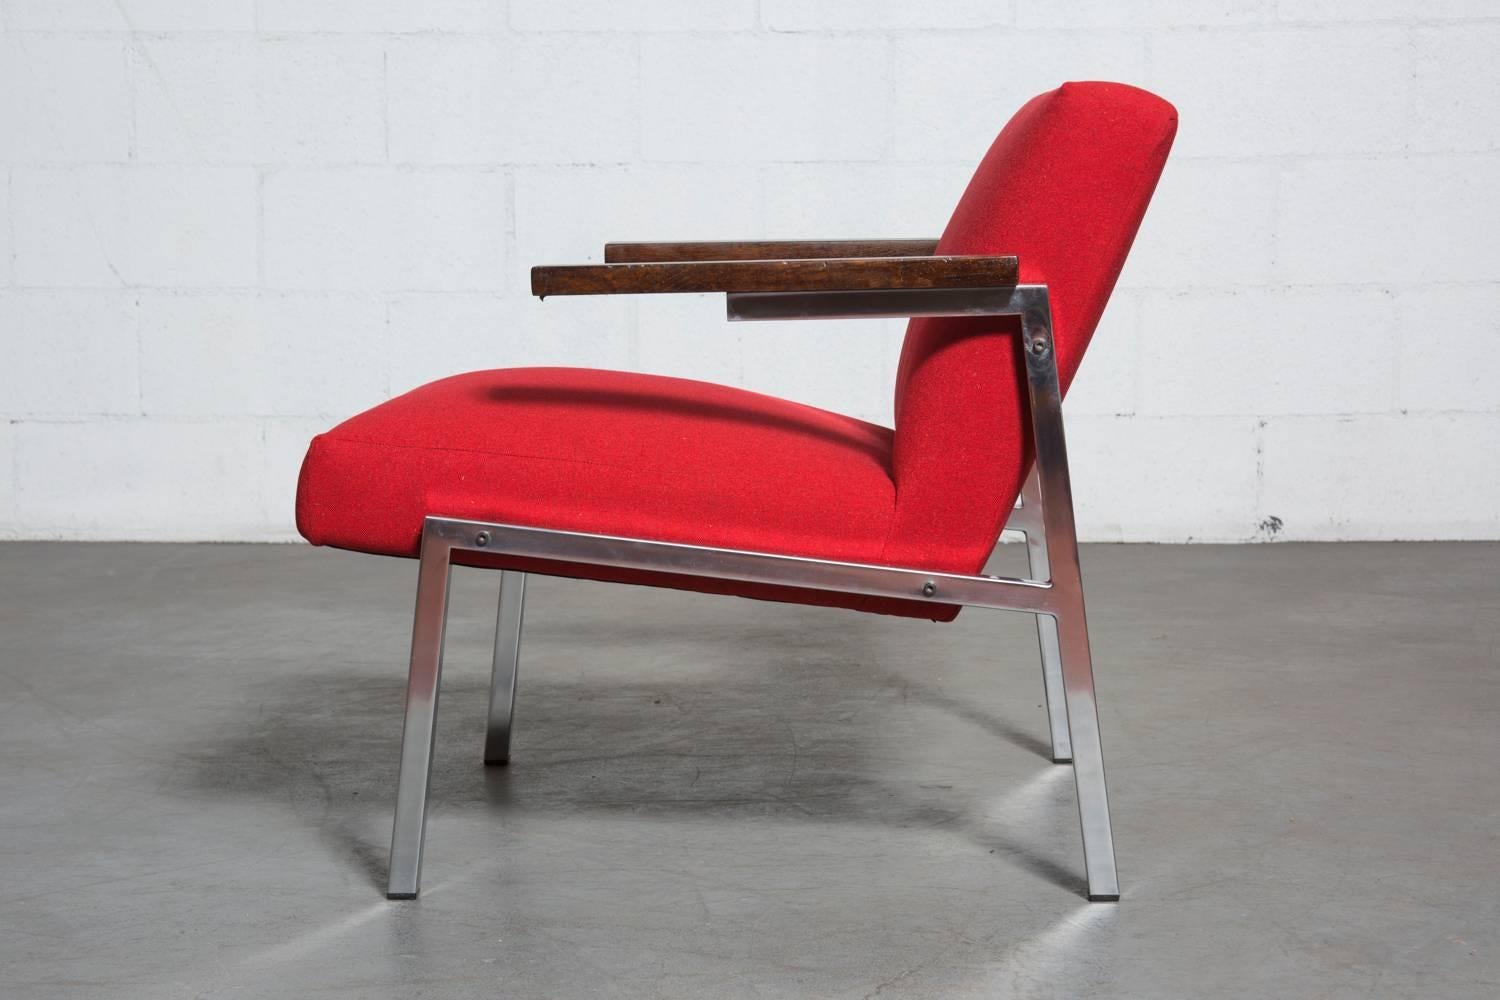 Mid century chair by Martin Visser for  Dutch furniture manufacturer ’t Spectrum. This 1964 piece, the SZ 66 lounge chair ( a “her’s” version to the “his” counter part, the SZ 67 chair) features a chrome frame and wenge arm rests. Newly upholstered